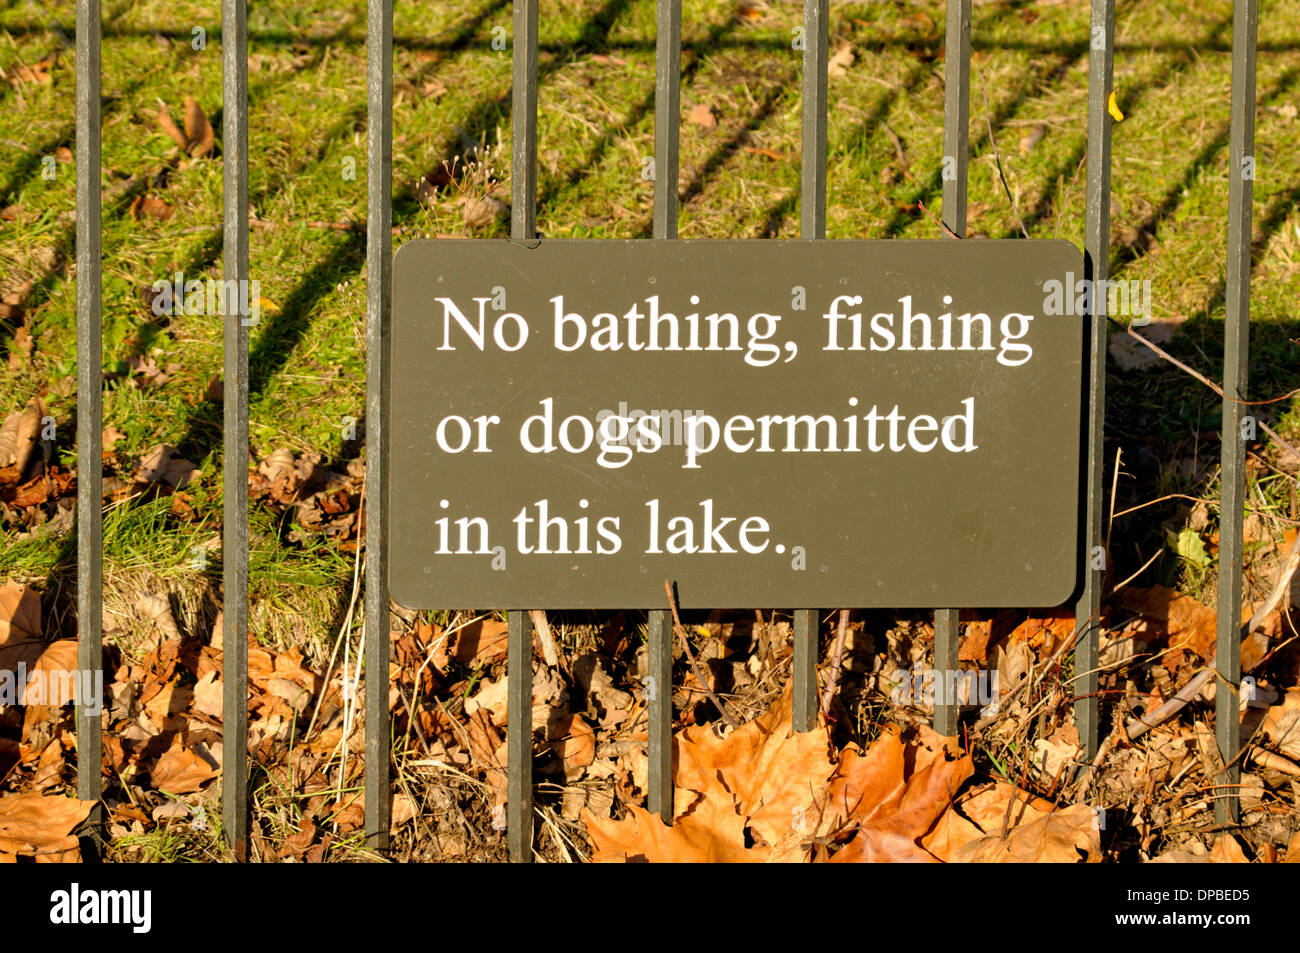 London, England, UK. Sign in Kensington Gardens 'No bathing, fishing or dogs permitted' Stock Photo